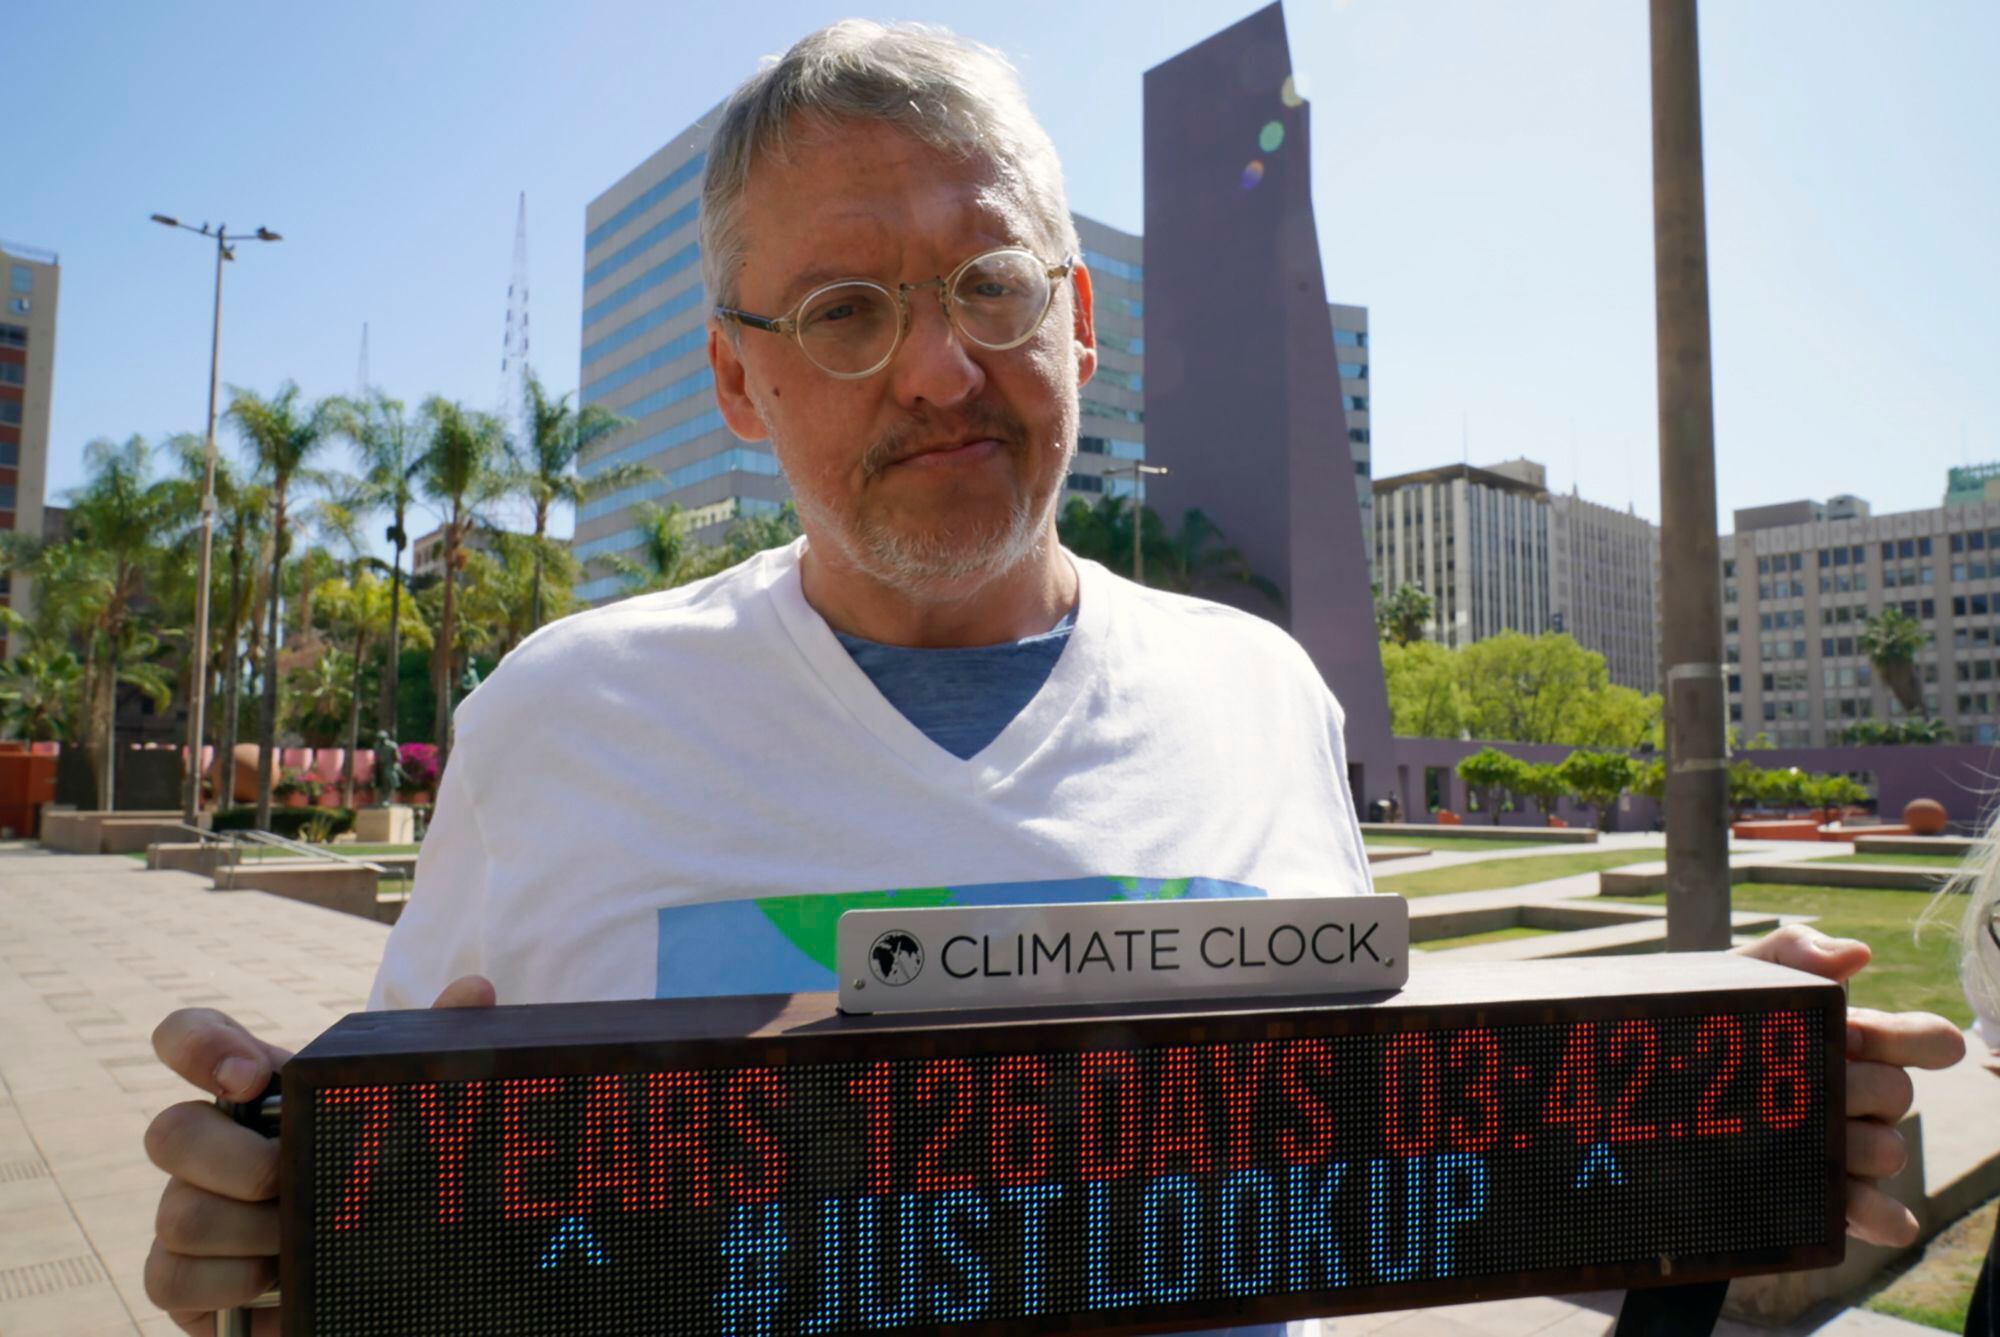 “Don’t Look Up” director McKay gives to climate activists